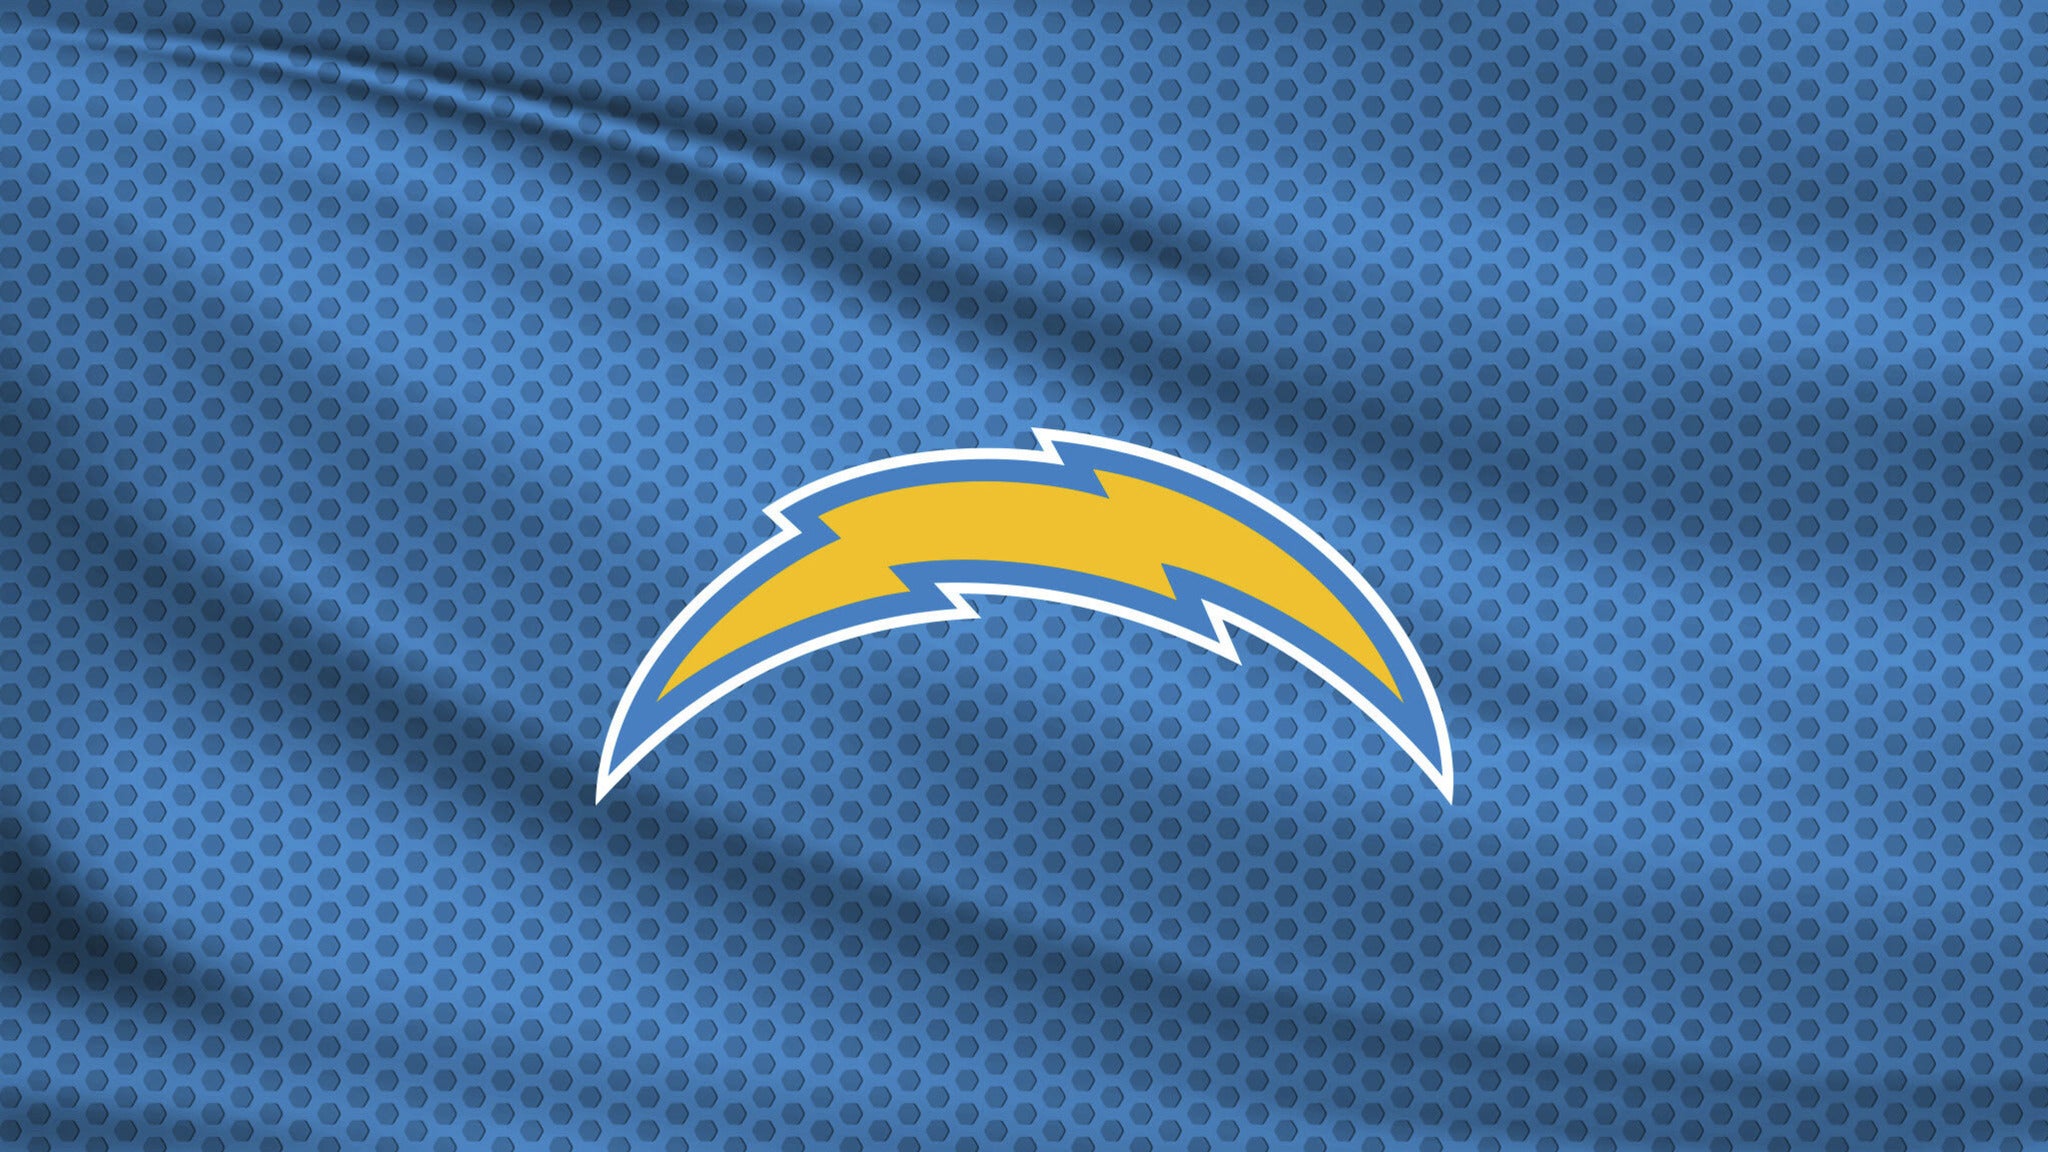 Los Angeles Chargers vs. Tennessee Titans at SoFi Stadium